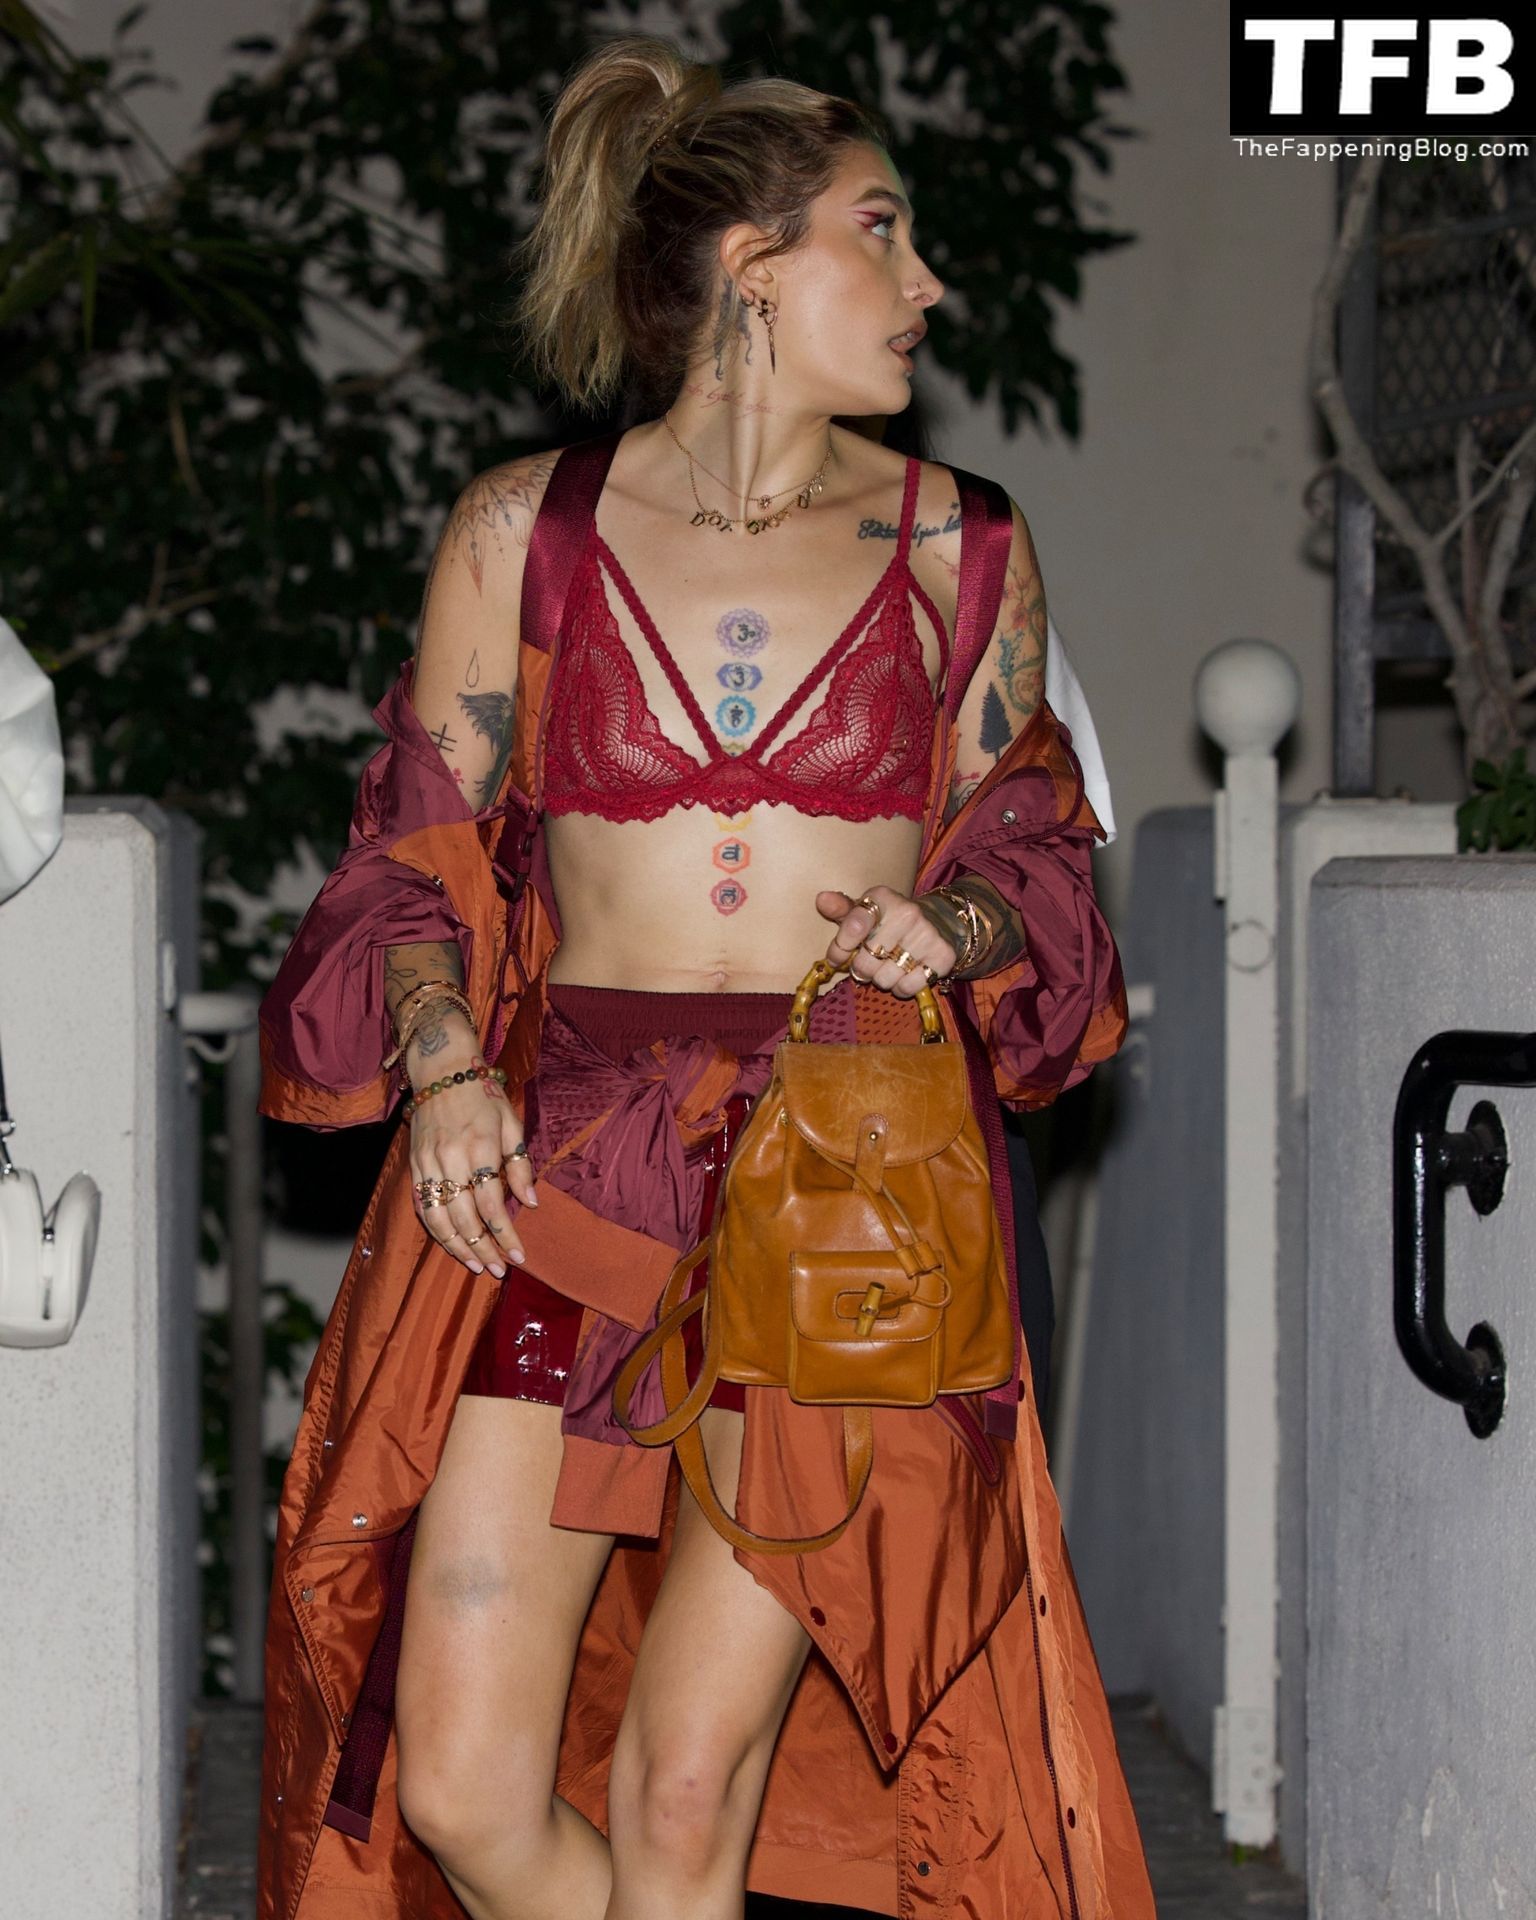 Paris Jackson See Through Nudity The Fappening Blog 29 - Paris Jackson Flashes Her Nude Tits Wearing a See-Through Bra in WeHo (34 Photos)